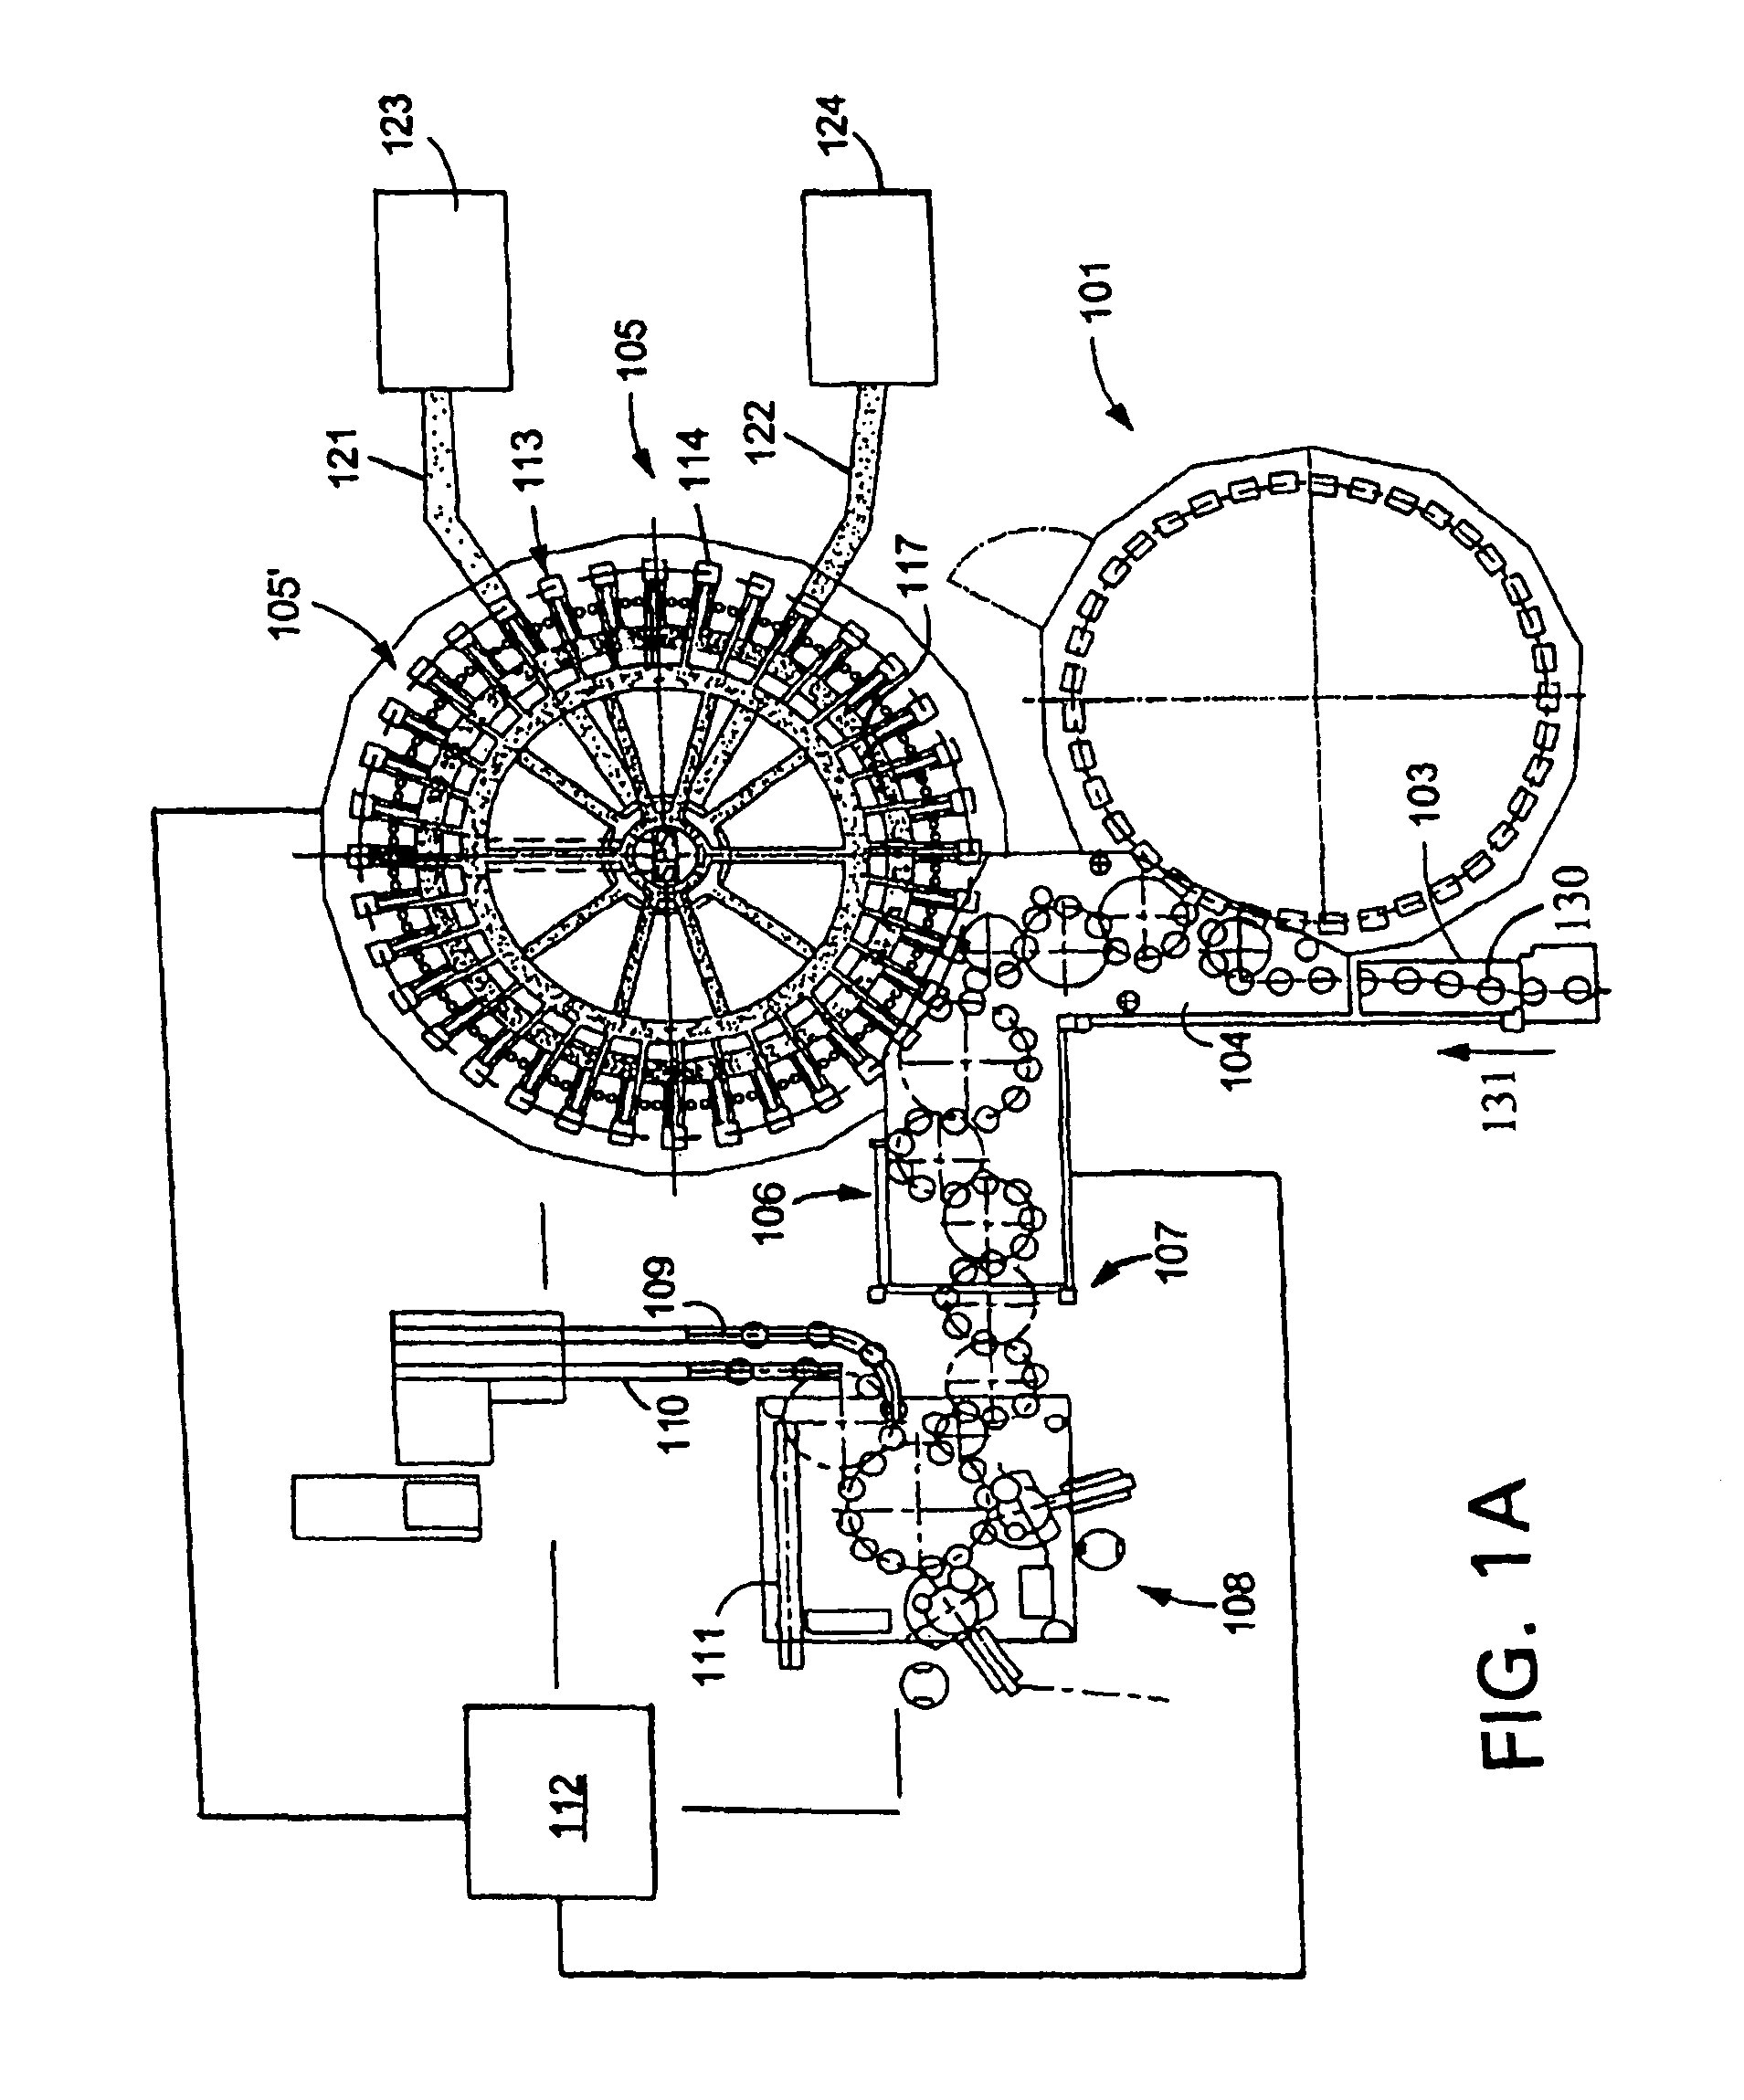 Device for dispensing labels, such as self-adhesive labels, on objects